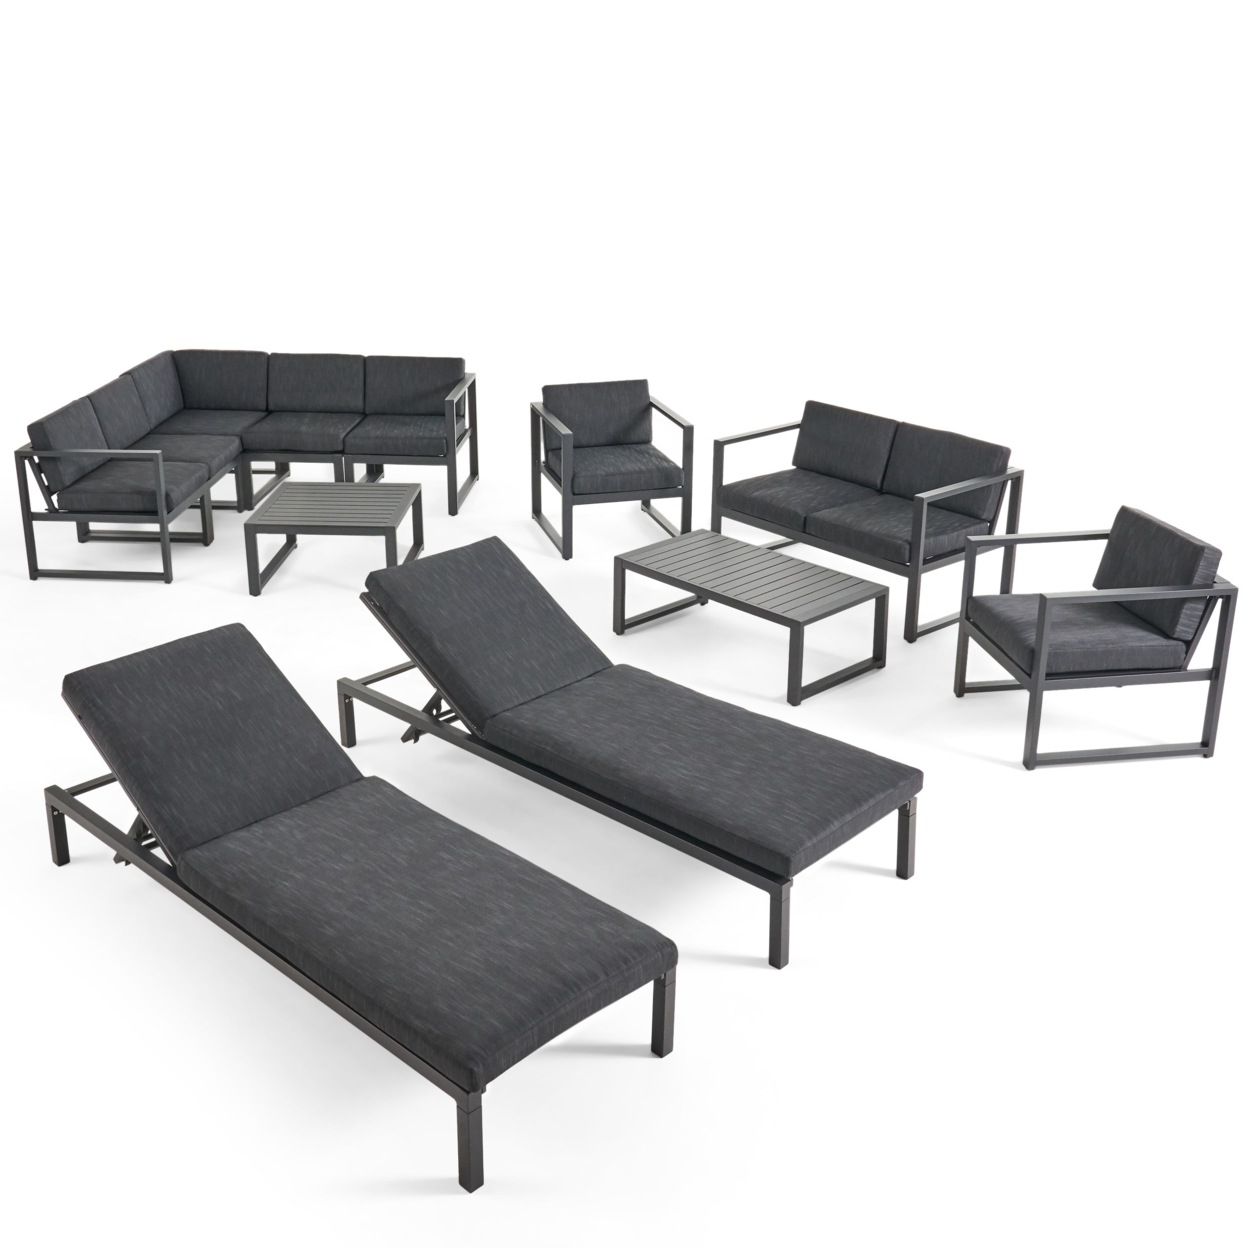 Amaryllis Outdoor 9 Seater Aluminum Sectional Sofa Set With Mesh Chaise Lounges